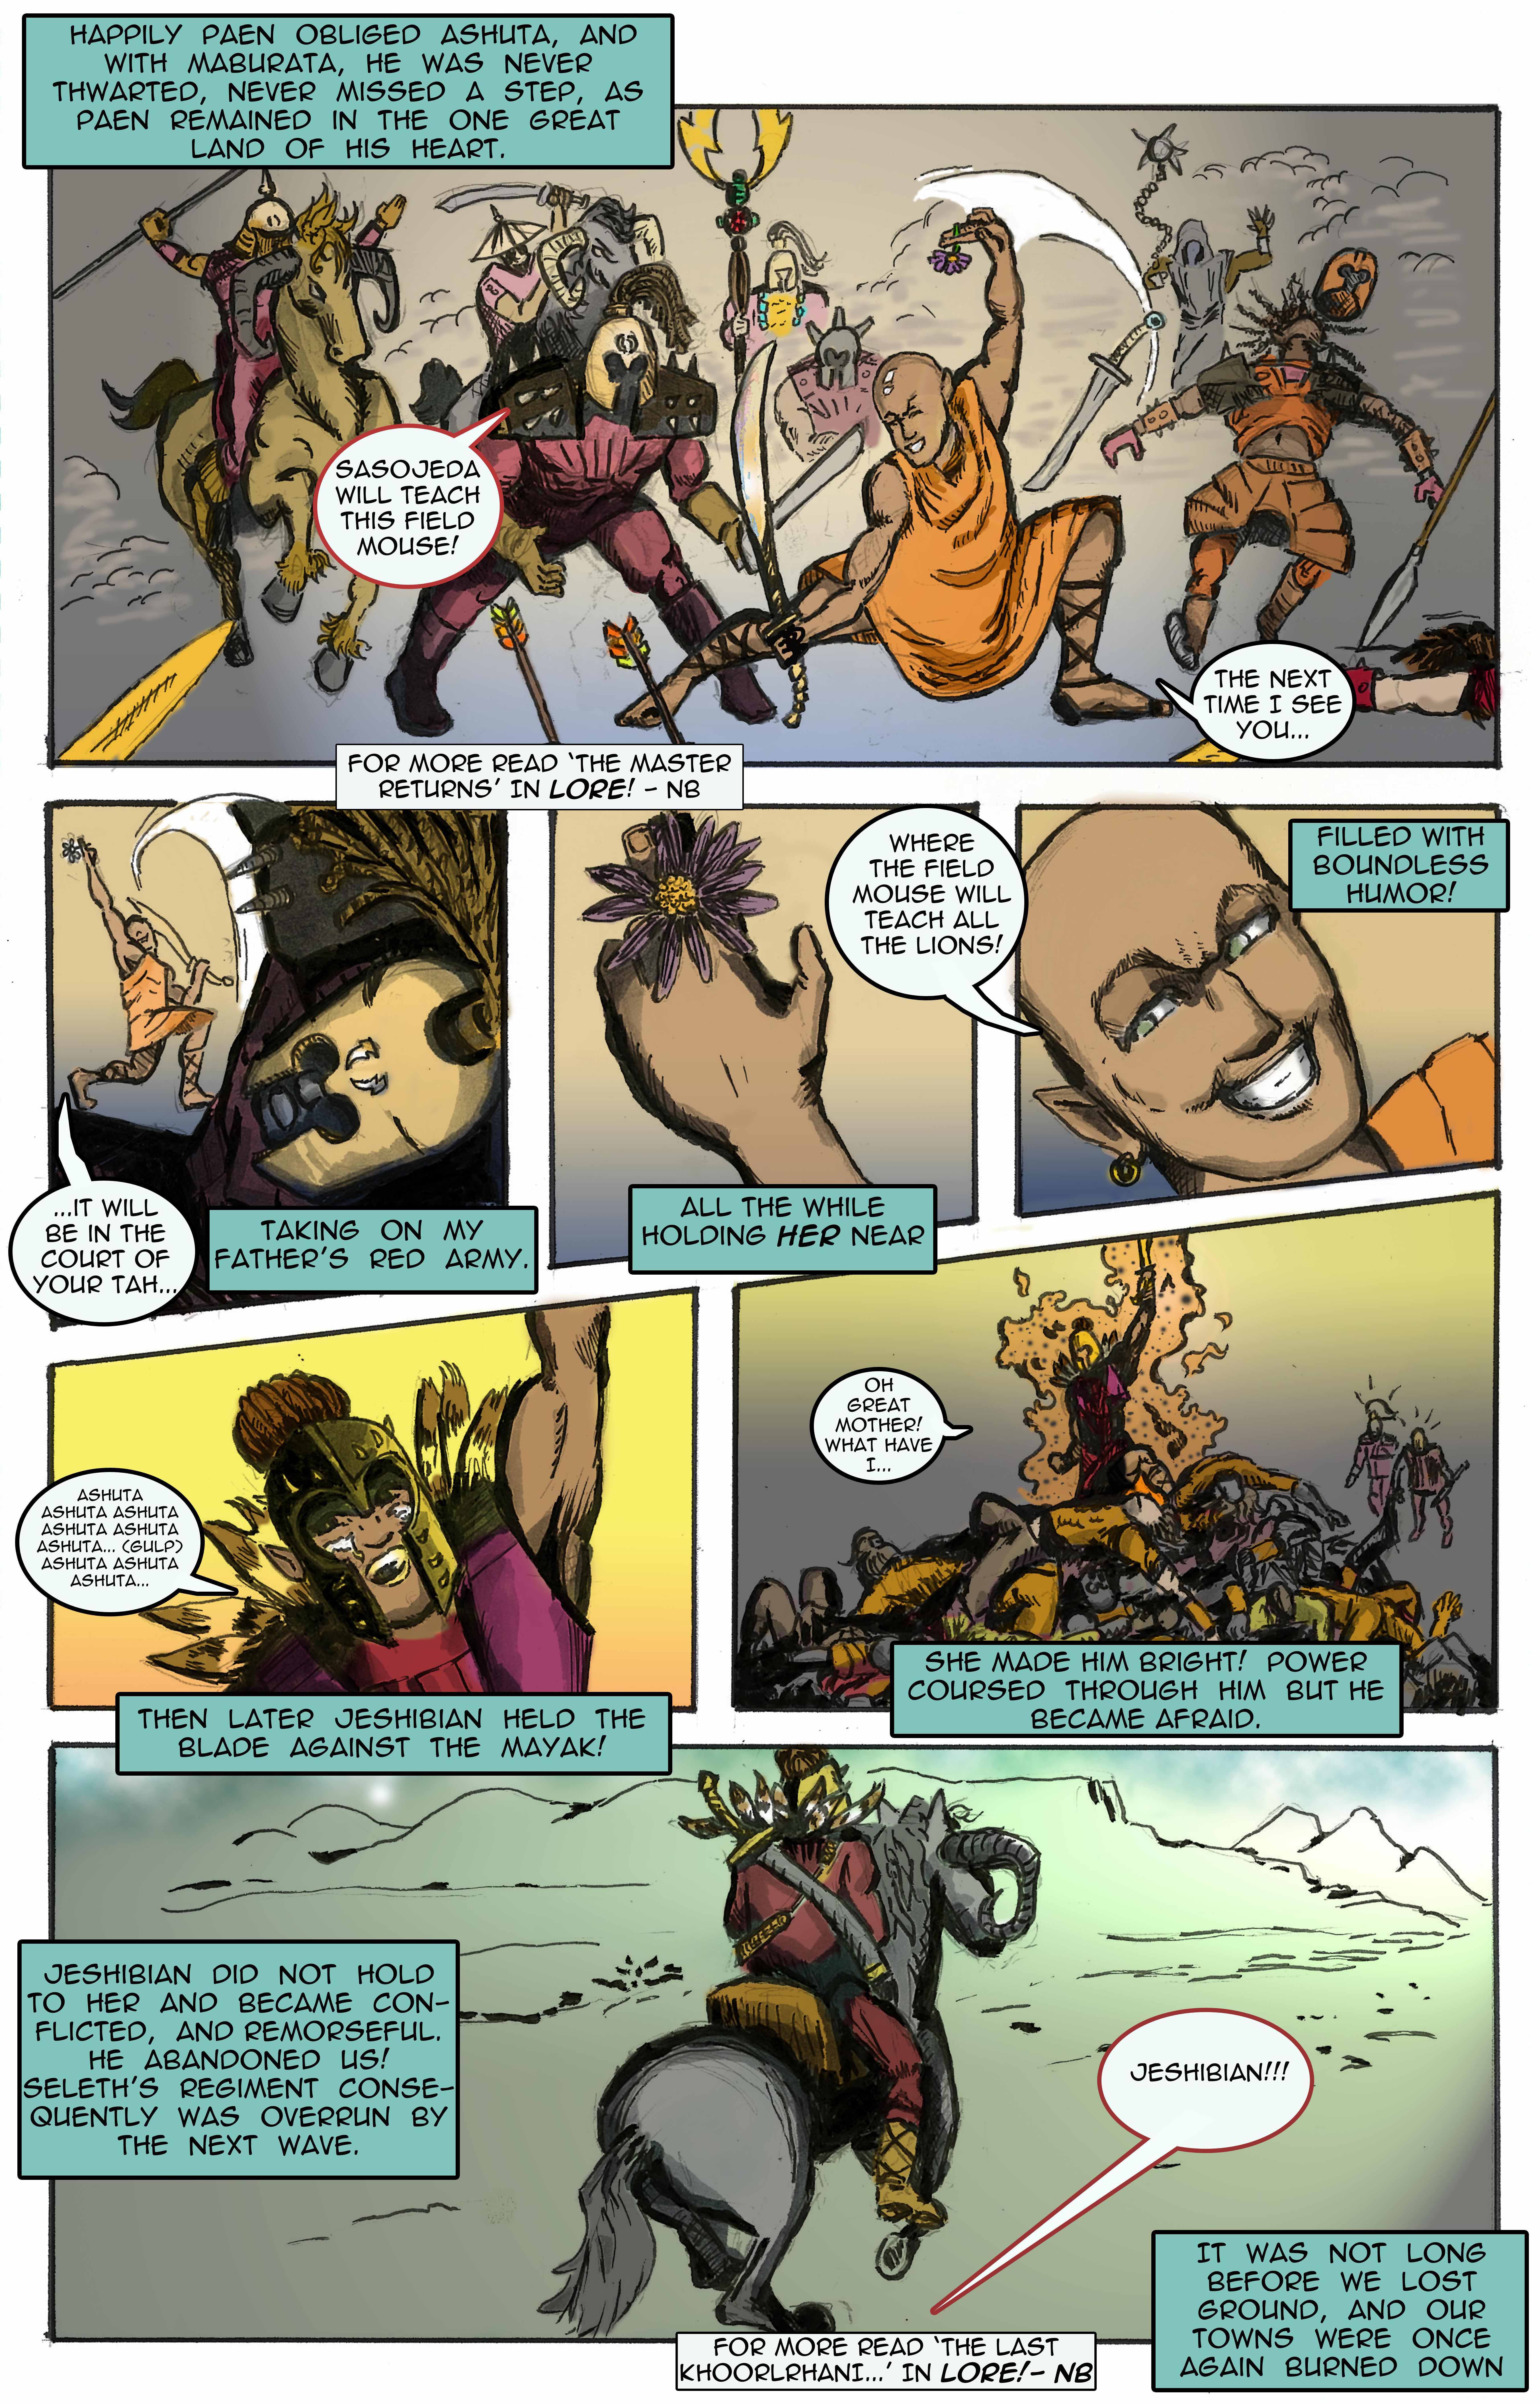 Dreamers of the Great One Land (page 18)